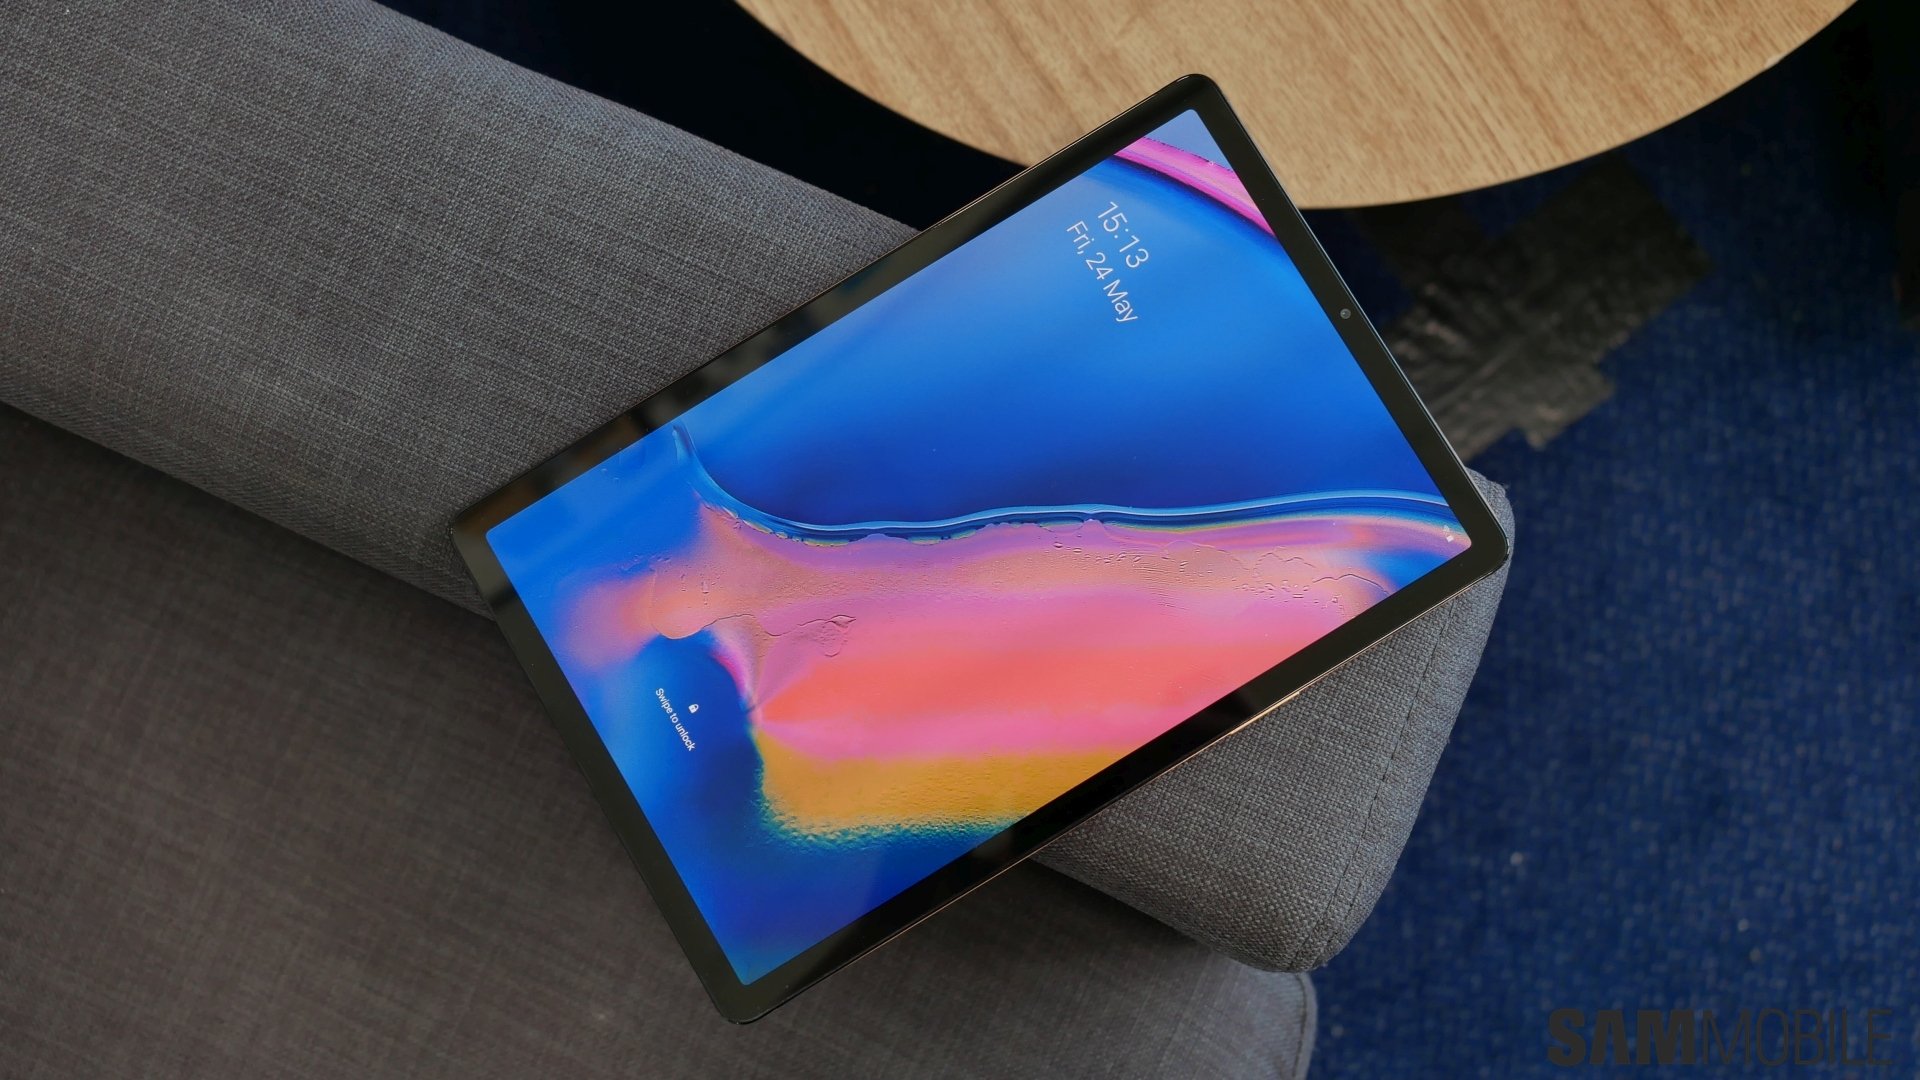 Galaxy Tab S5e starts receiving Android 11 update - SamMobile